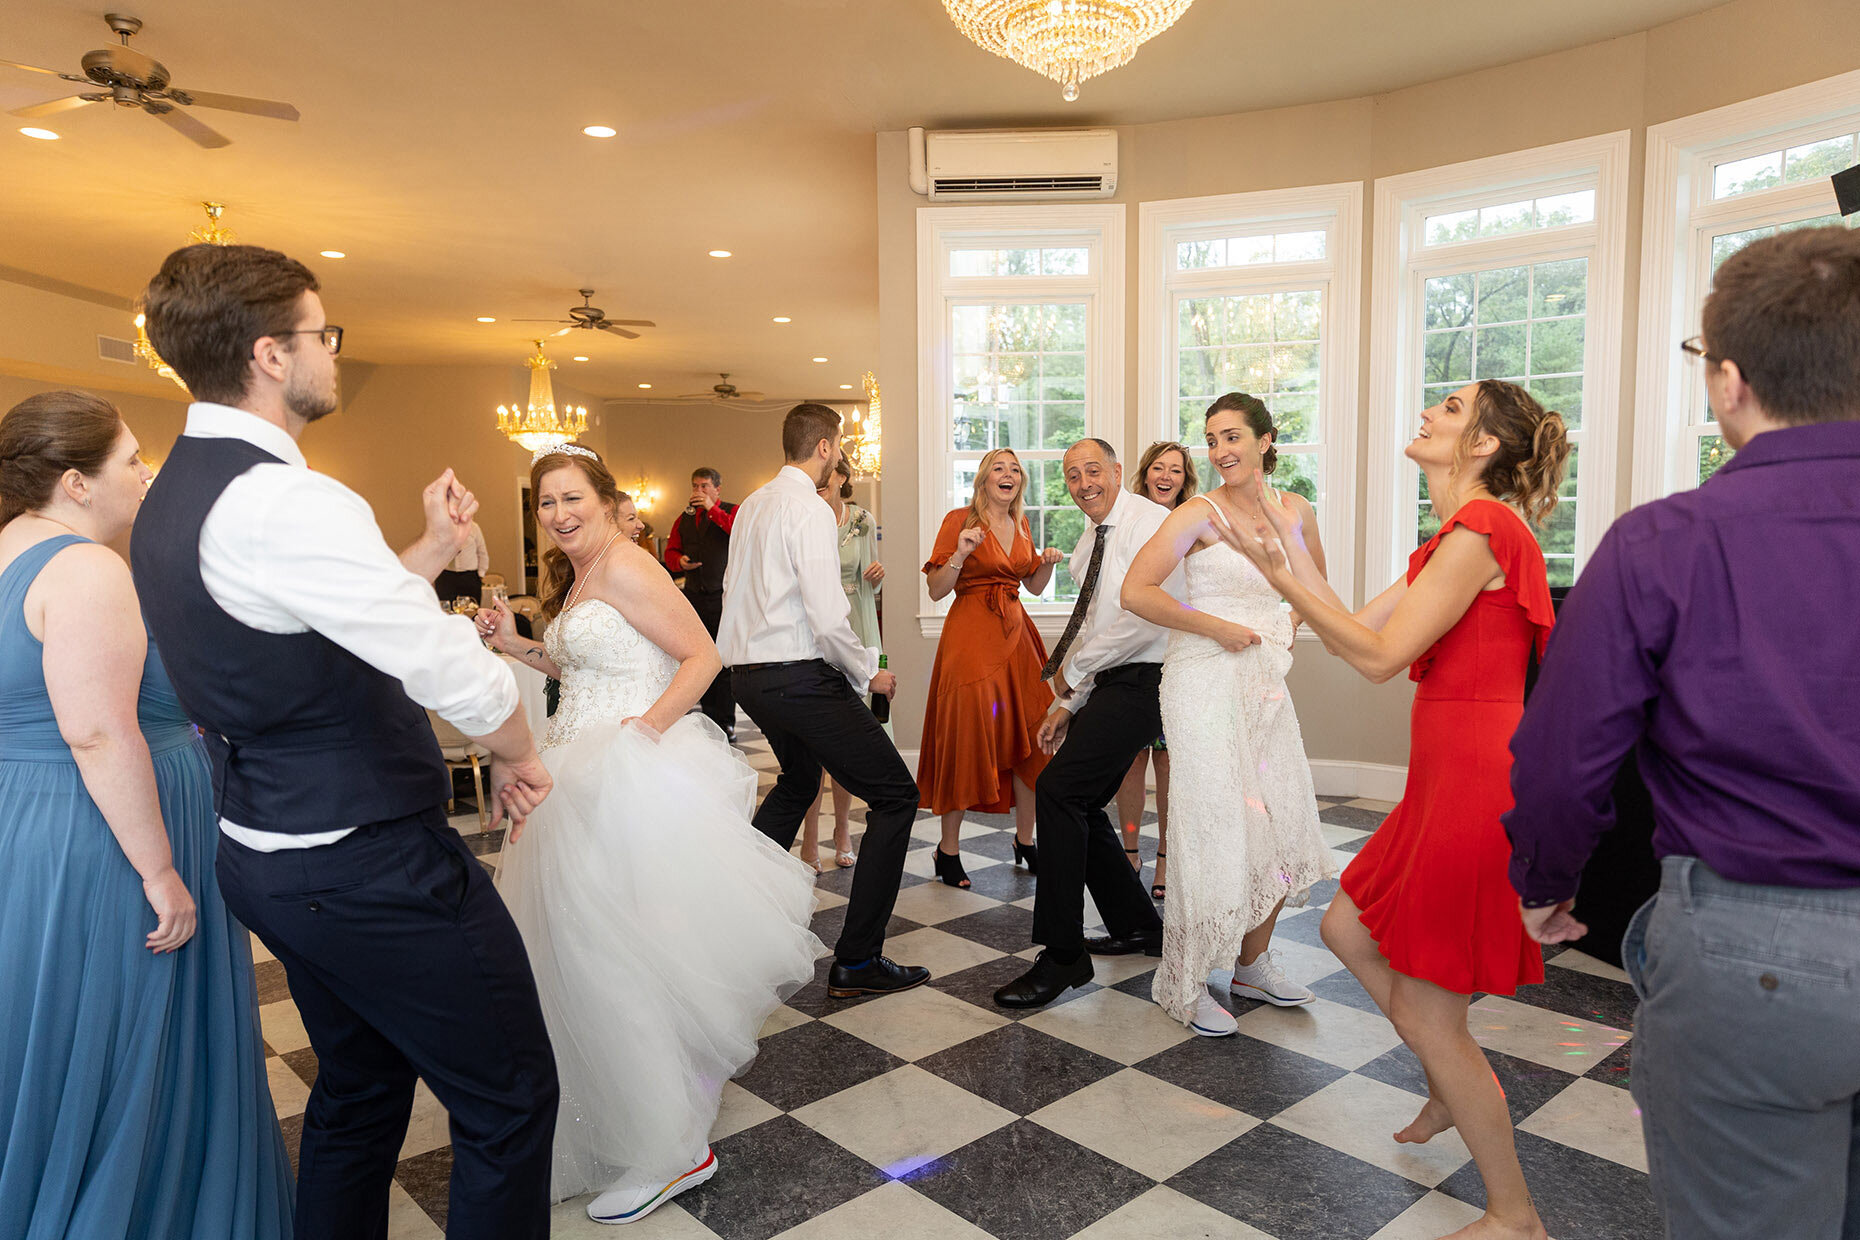 Guests Dancing on Dance Floor at Reception at Cameron Estate Inn